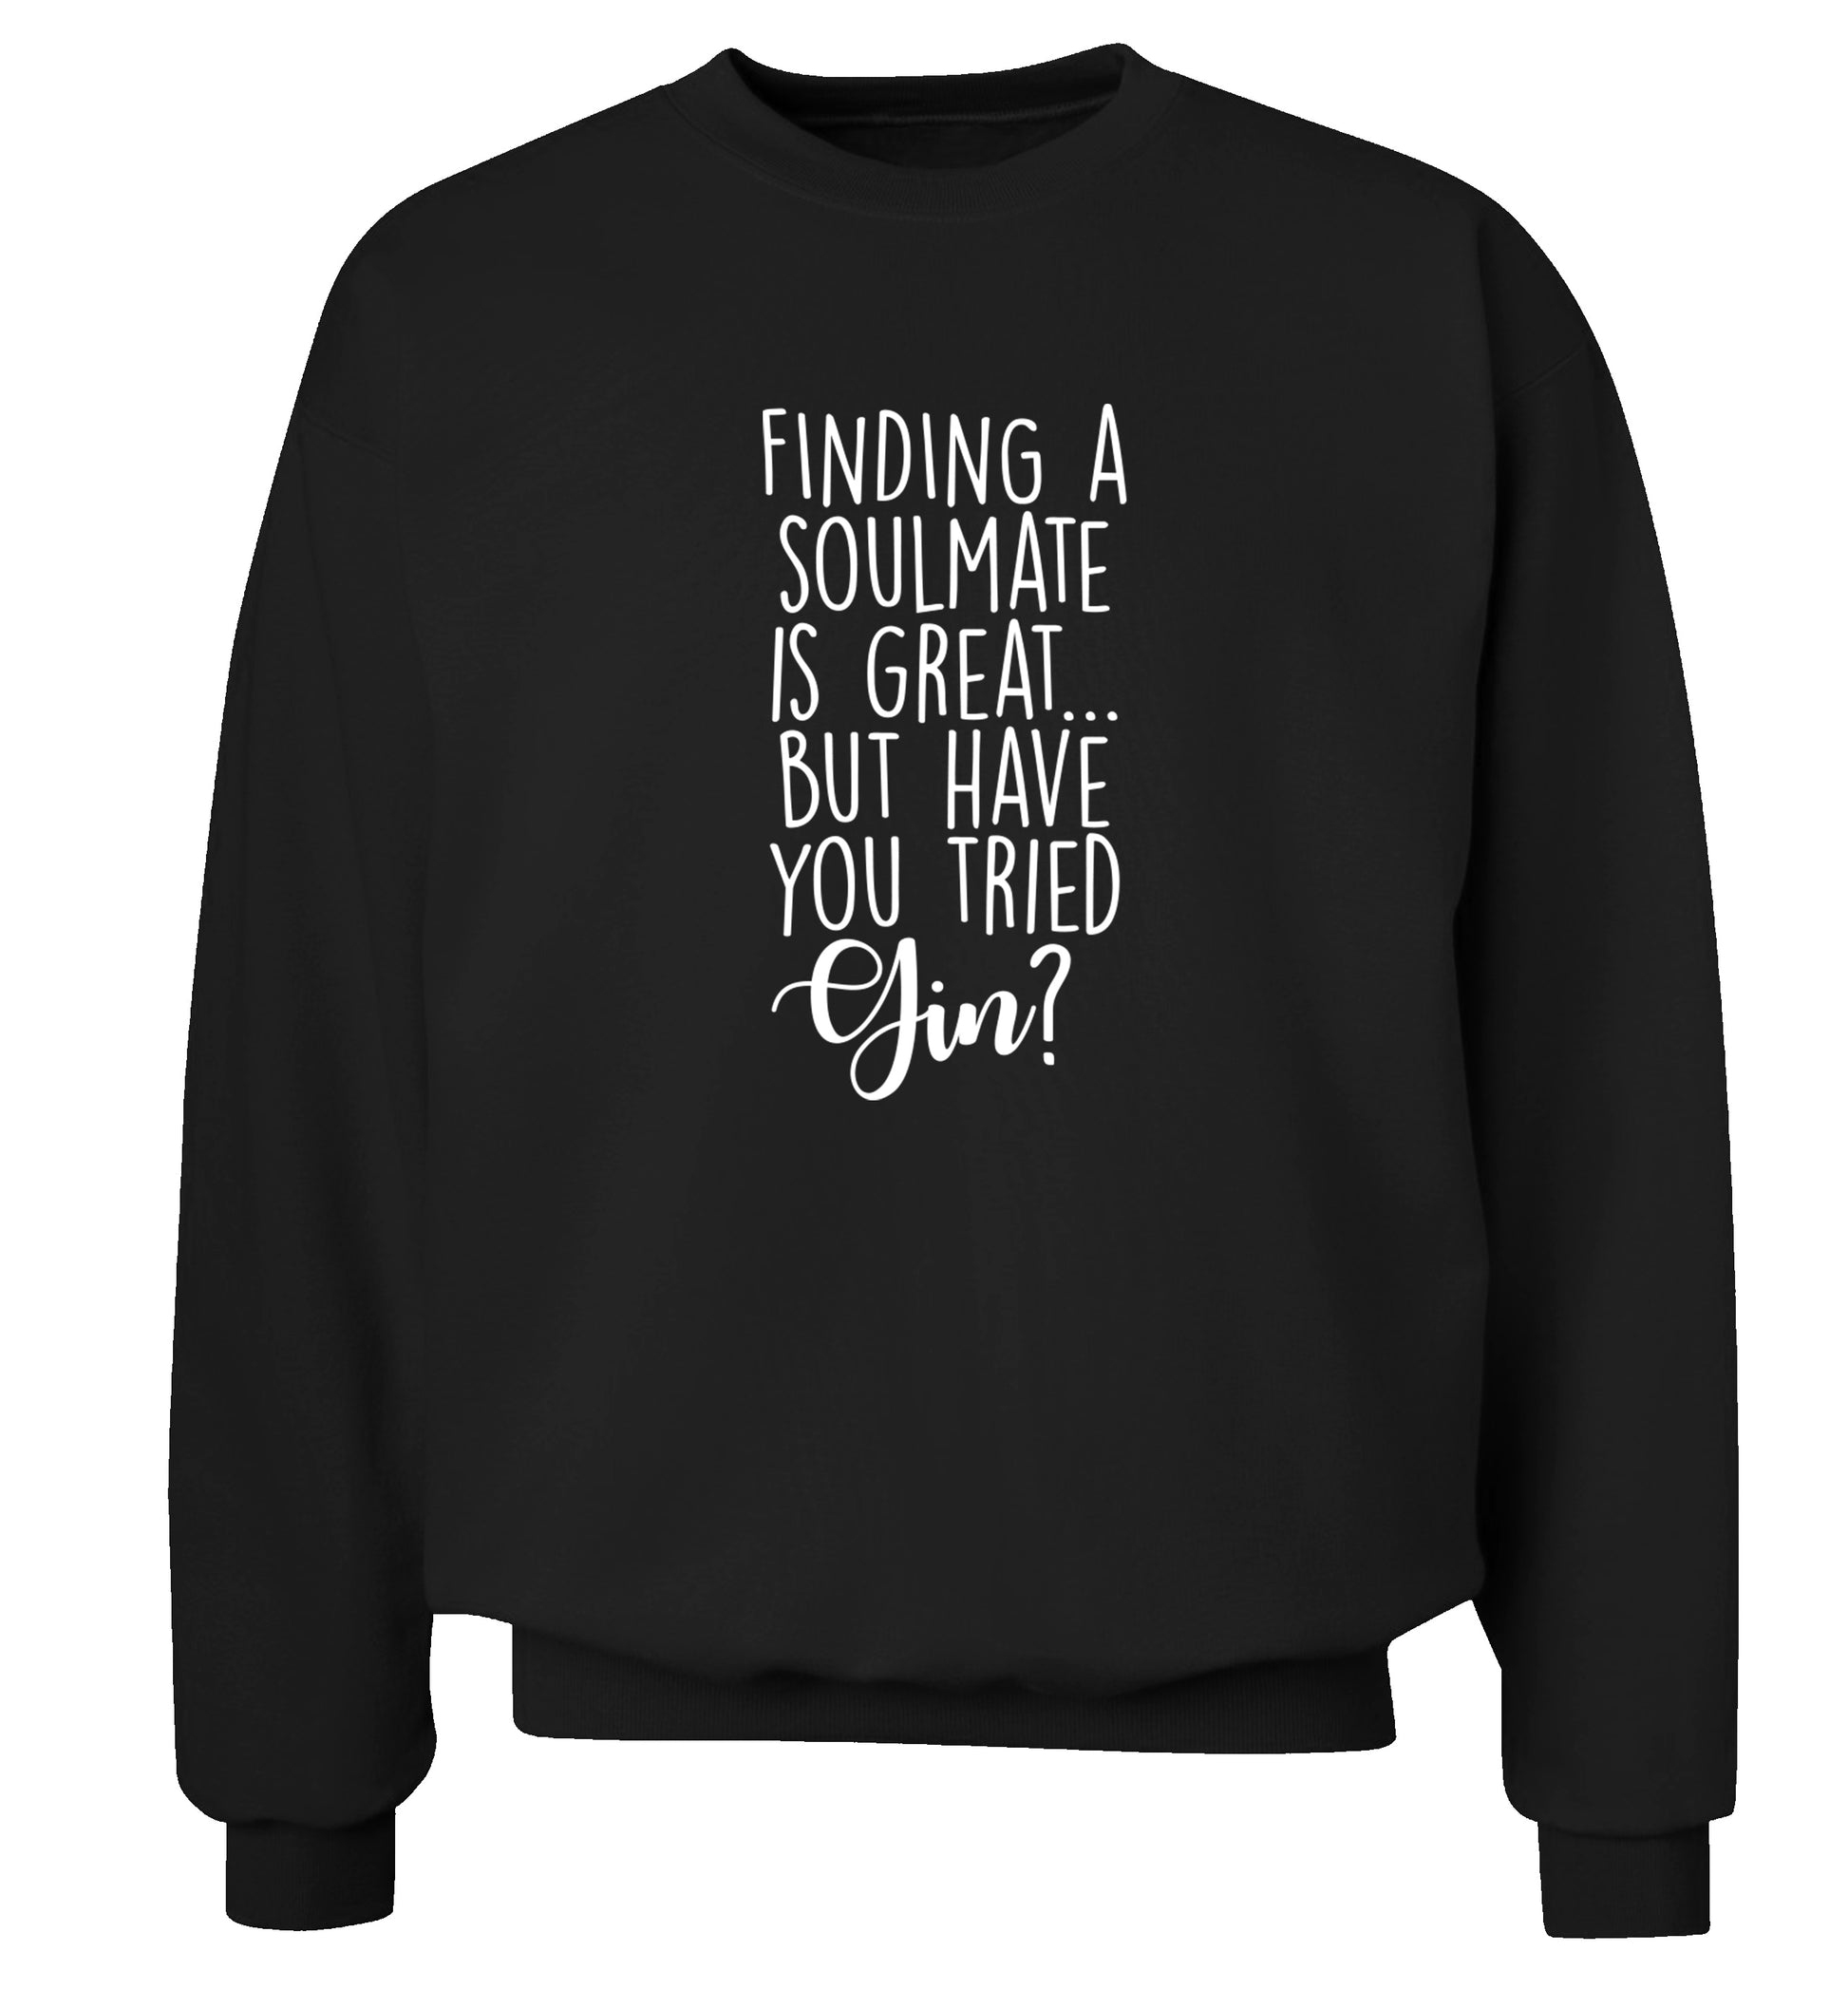 Finding a soulmate is great but have you tried gin? Adult's unisex black Sweater 2XL